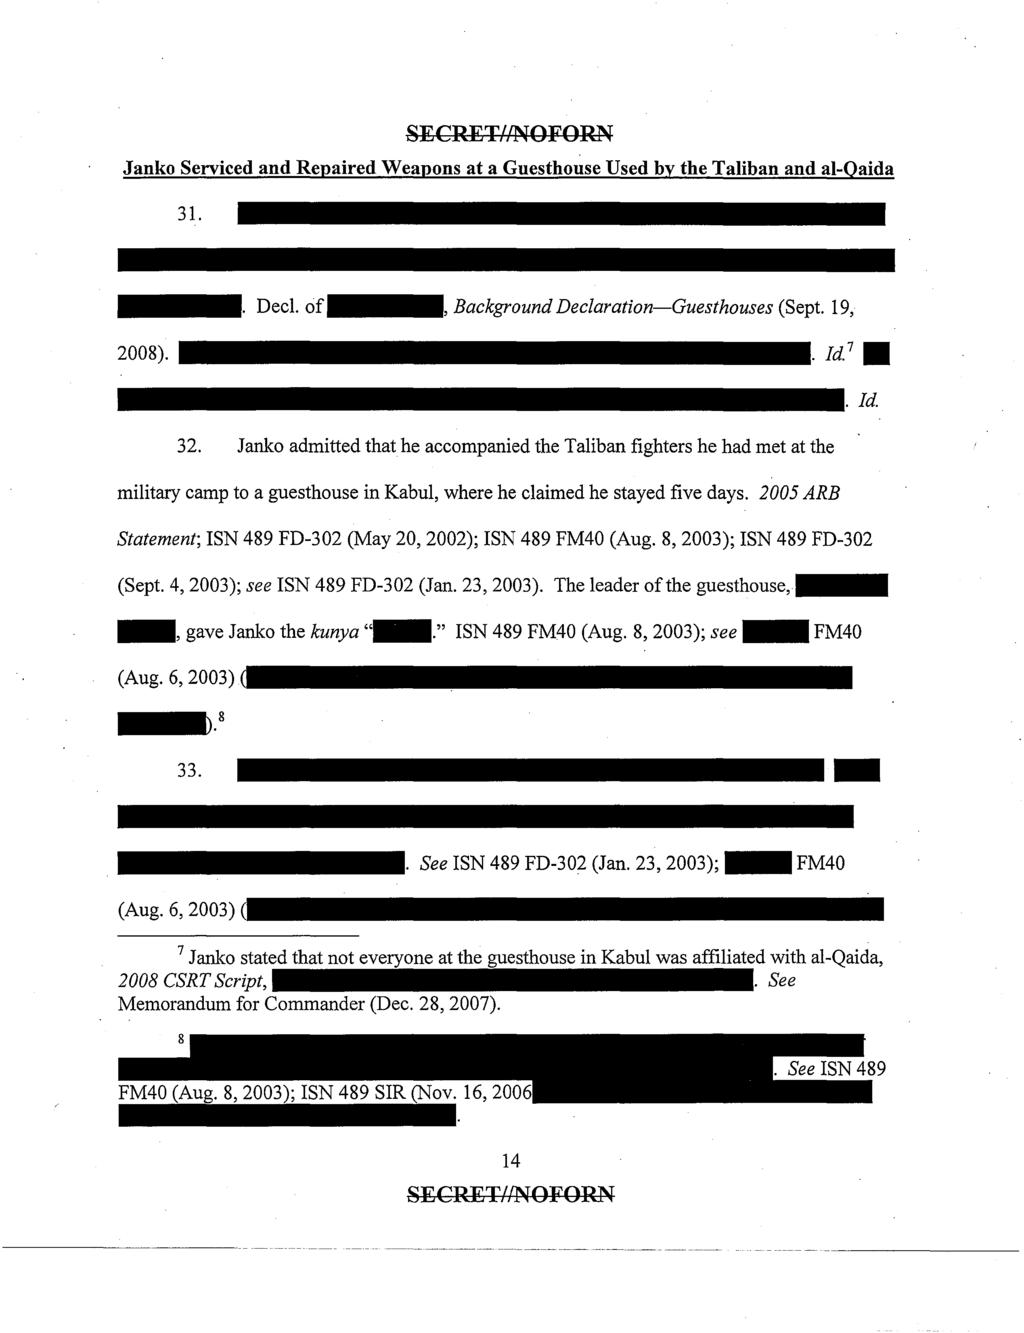 Case 1:05-cv-01310-UNA Document 117-2 Filed 12/05/2008 Page 17 of 24 SECRETIINOFOR.~ Janko Serviced and Repaired Weapons at a Guesthouse Used by the Taliban and al-qaida 31.